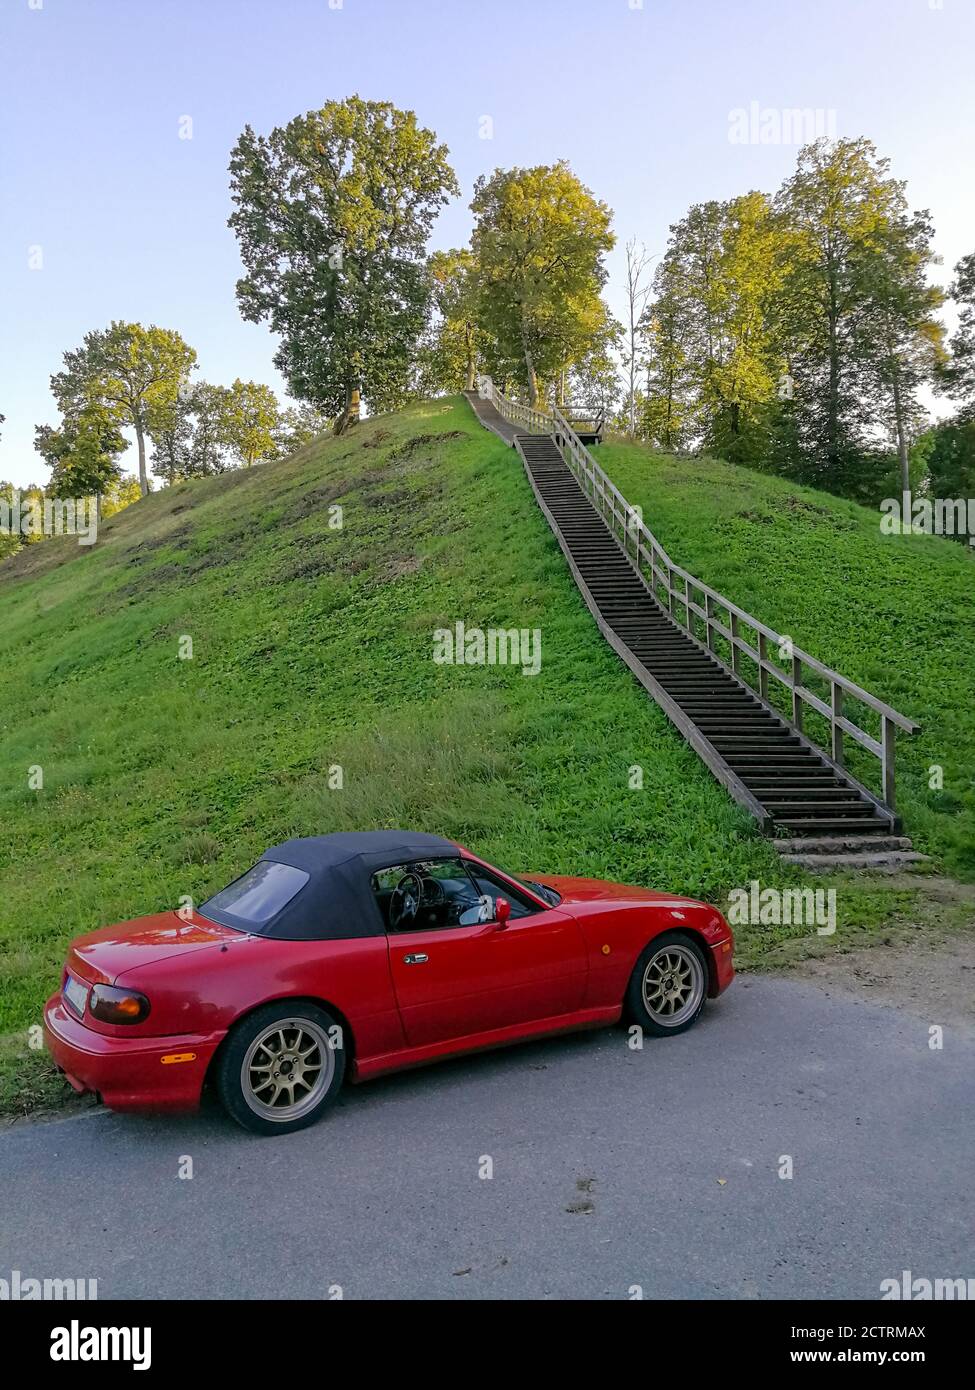 Zemosios Panemunes mound  with wooden stairs and modern car parked close by.  Travel concept Stock Photo